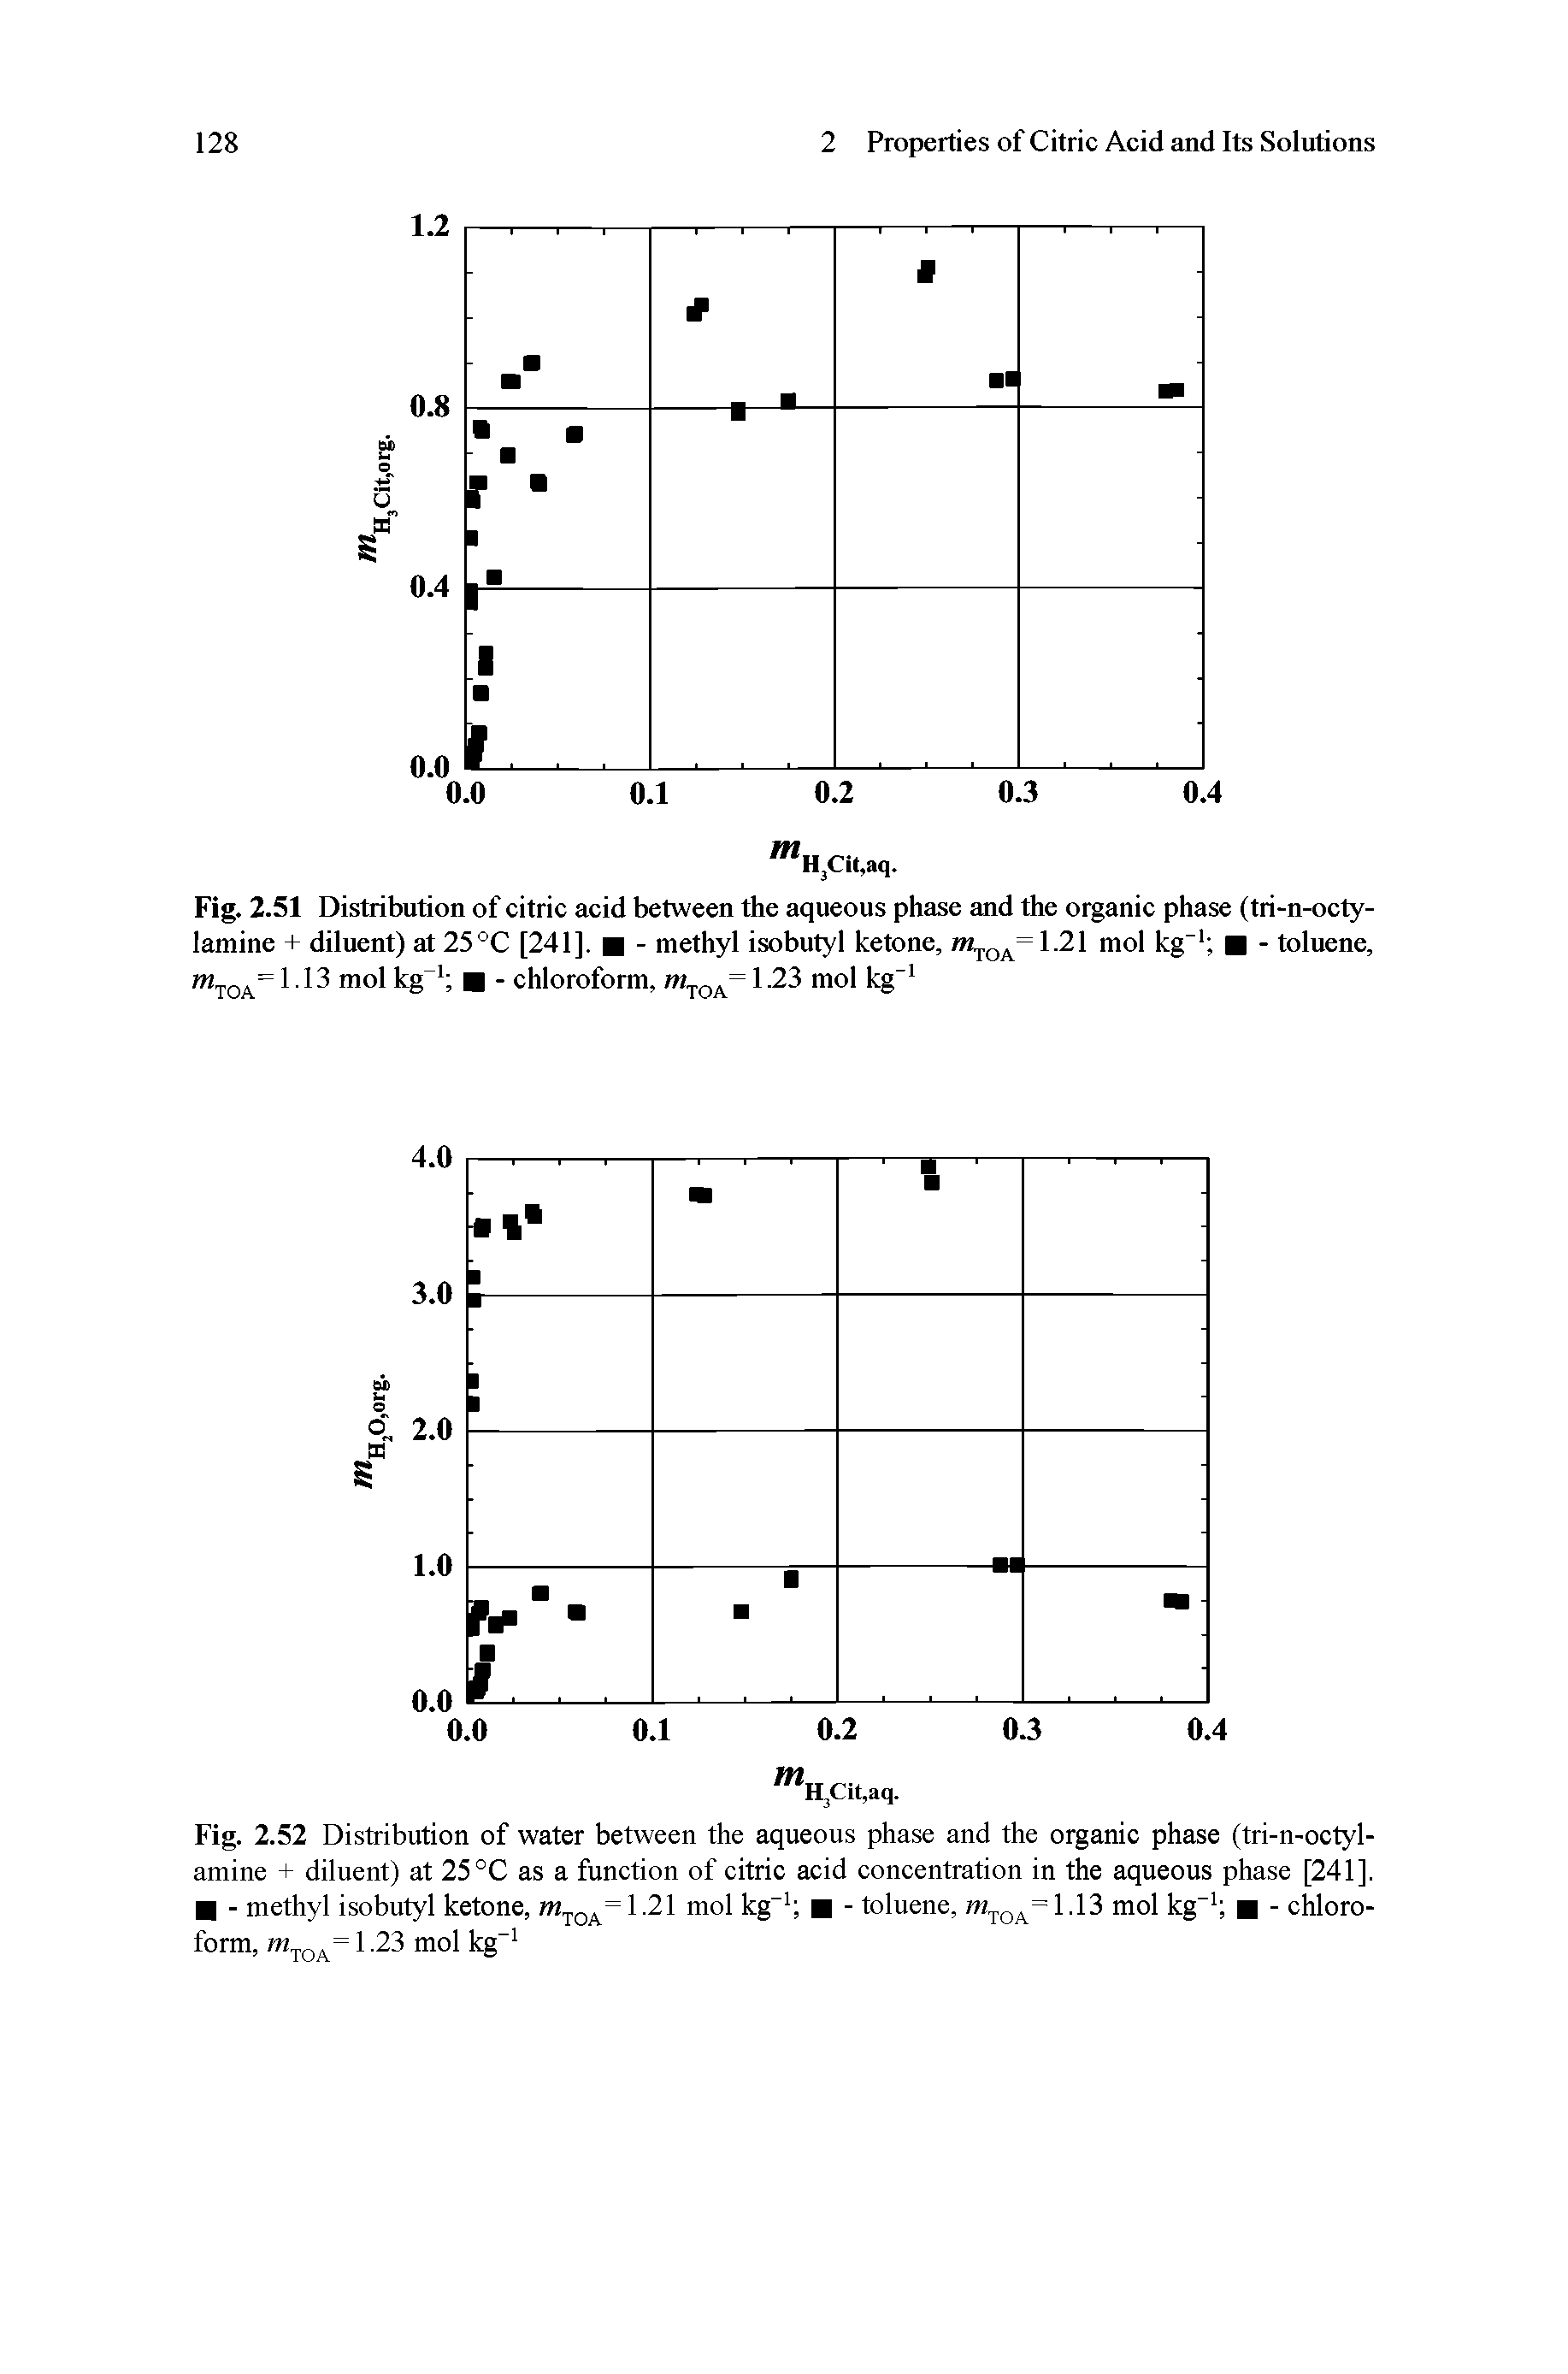 Fig. 2.52 Distribution of water between the aqueous phase and the oiganic phase (tri-n-octyl-amine + diluent) at 25 °C as a function of citric acid concentration in the aqueous phase [241], - methyl isobutyl ketone, m.j,Q =1.21 mol kg" - toluene, mol kg" - chloro-...